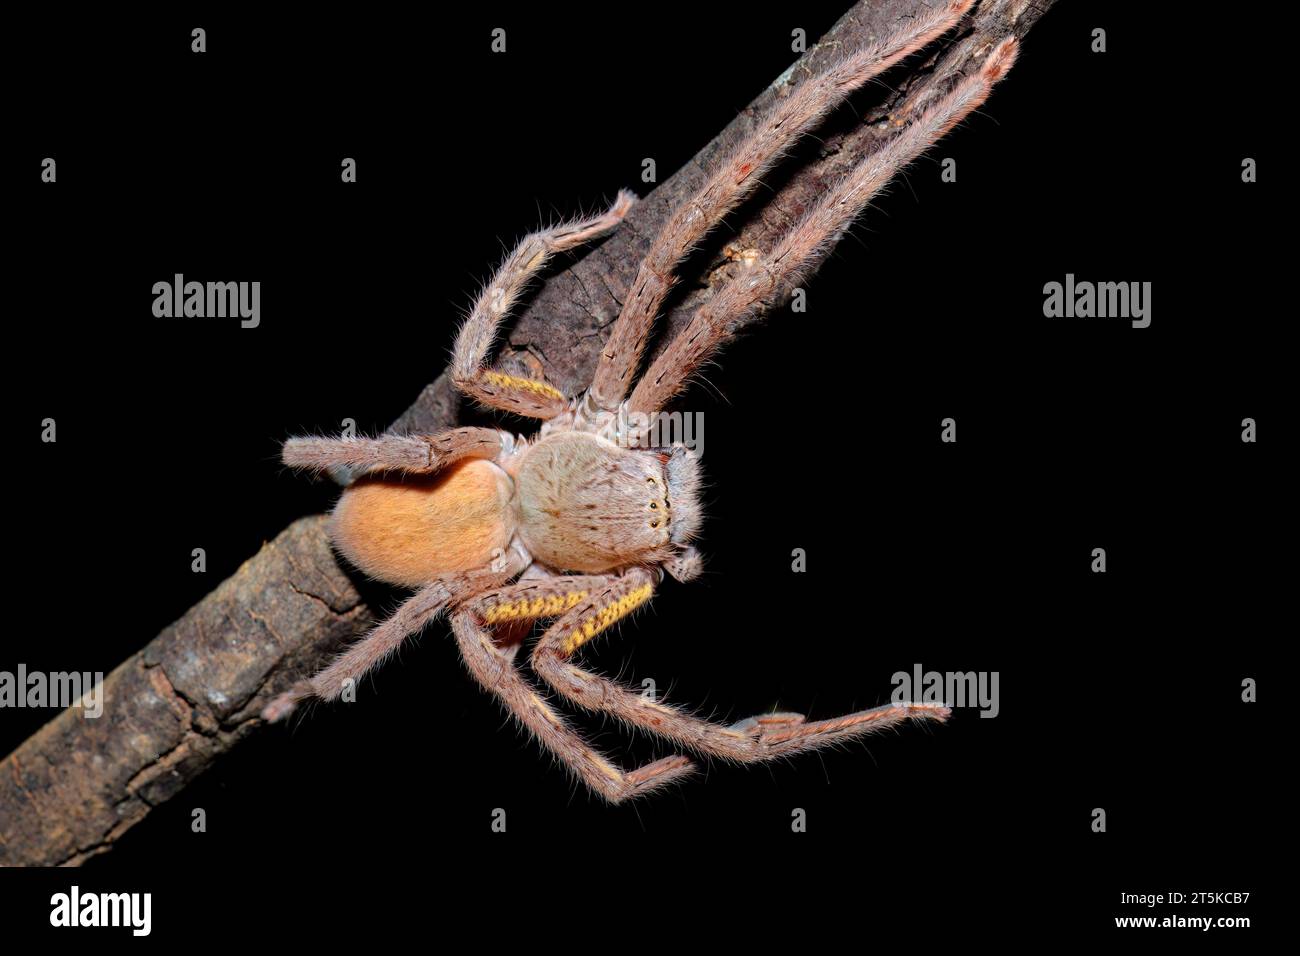 Close-up of a hairy Australian spider isolated on a black background Stock Photo